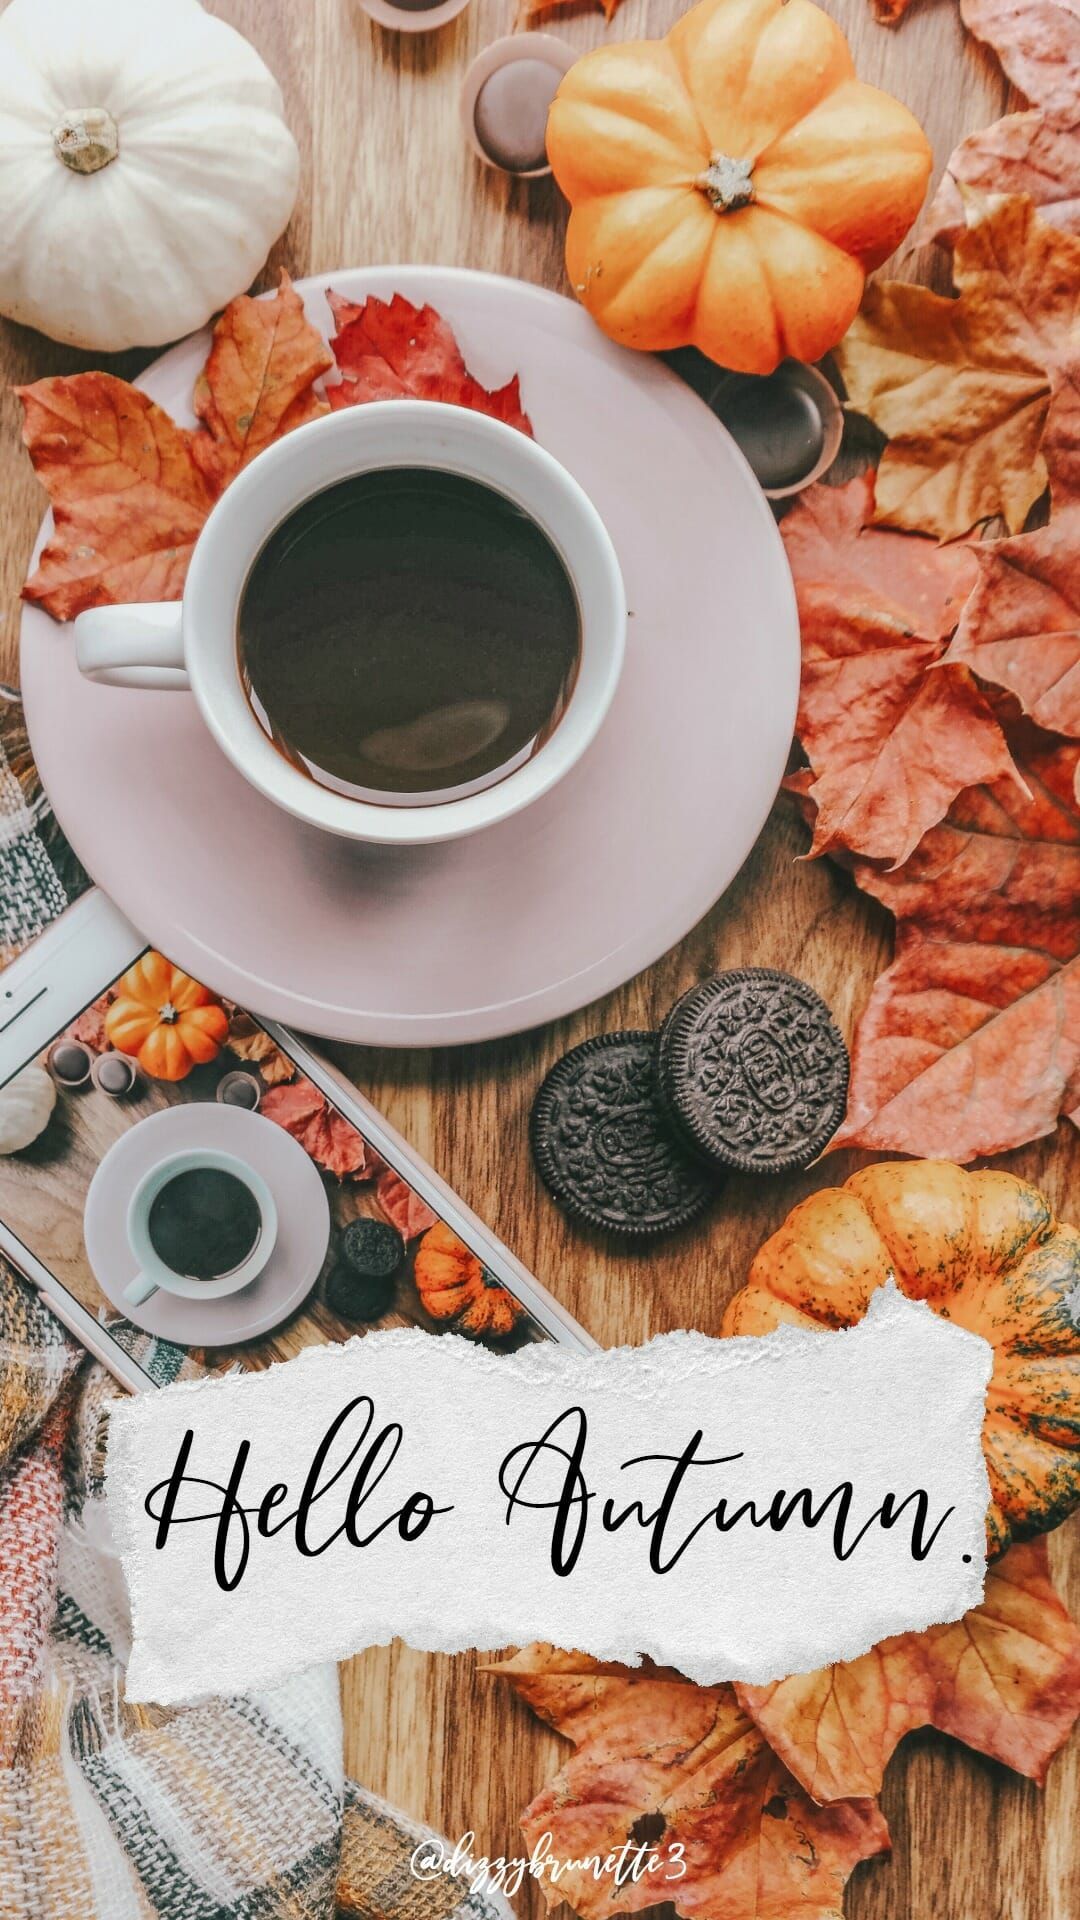 Free Amazing Fall Wallpaper Background For iPhone. iPhone wallpaper vintage, iPhone wallpaper fall, Fall wallpaper